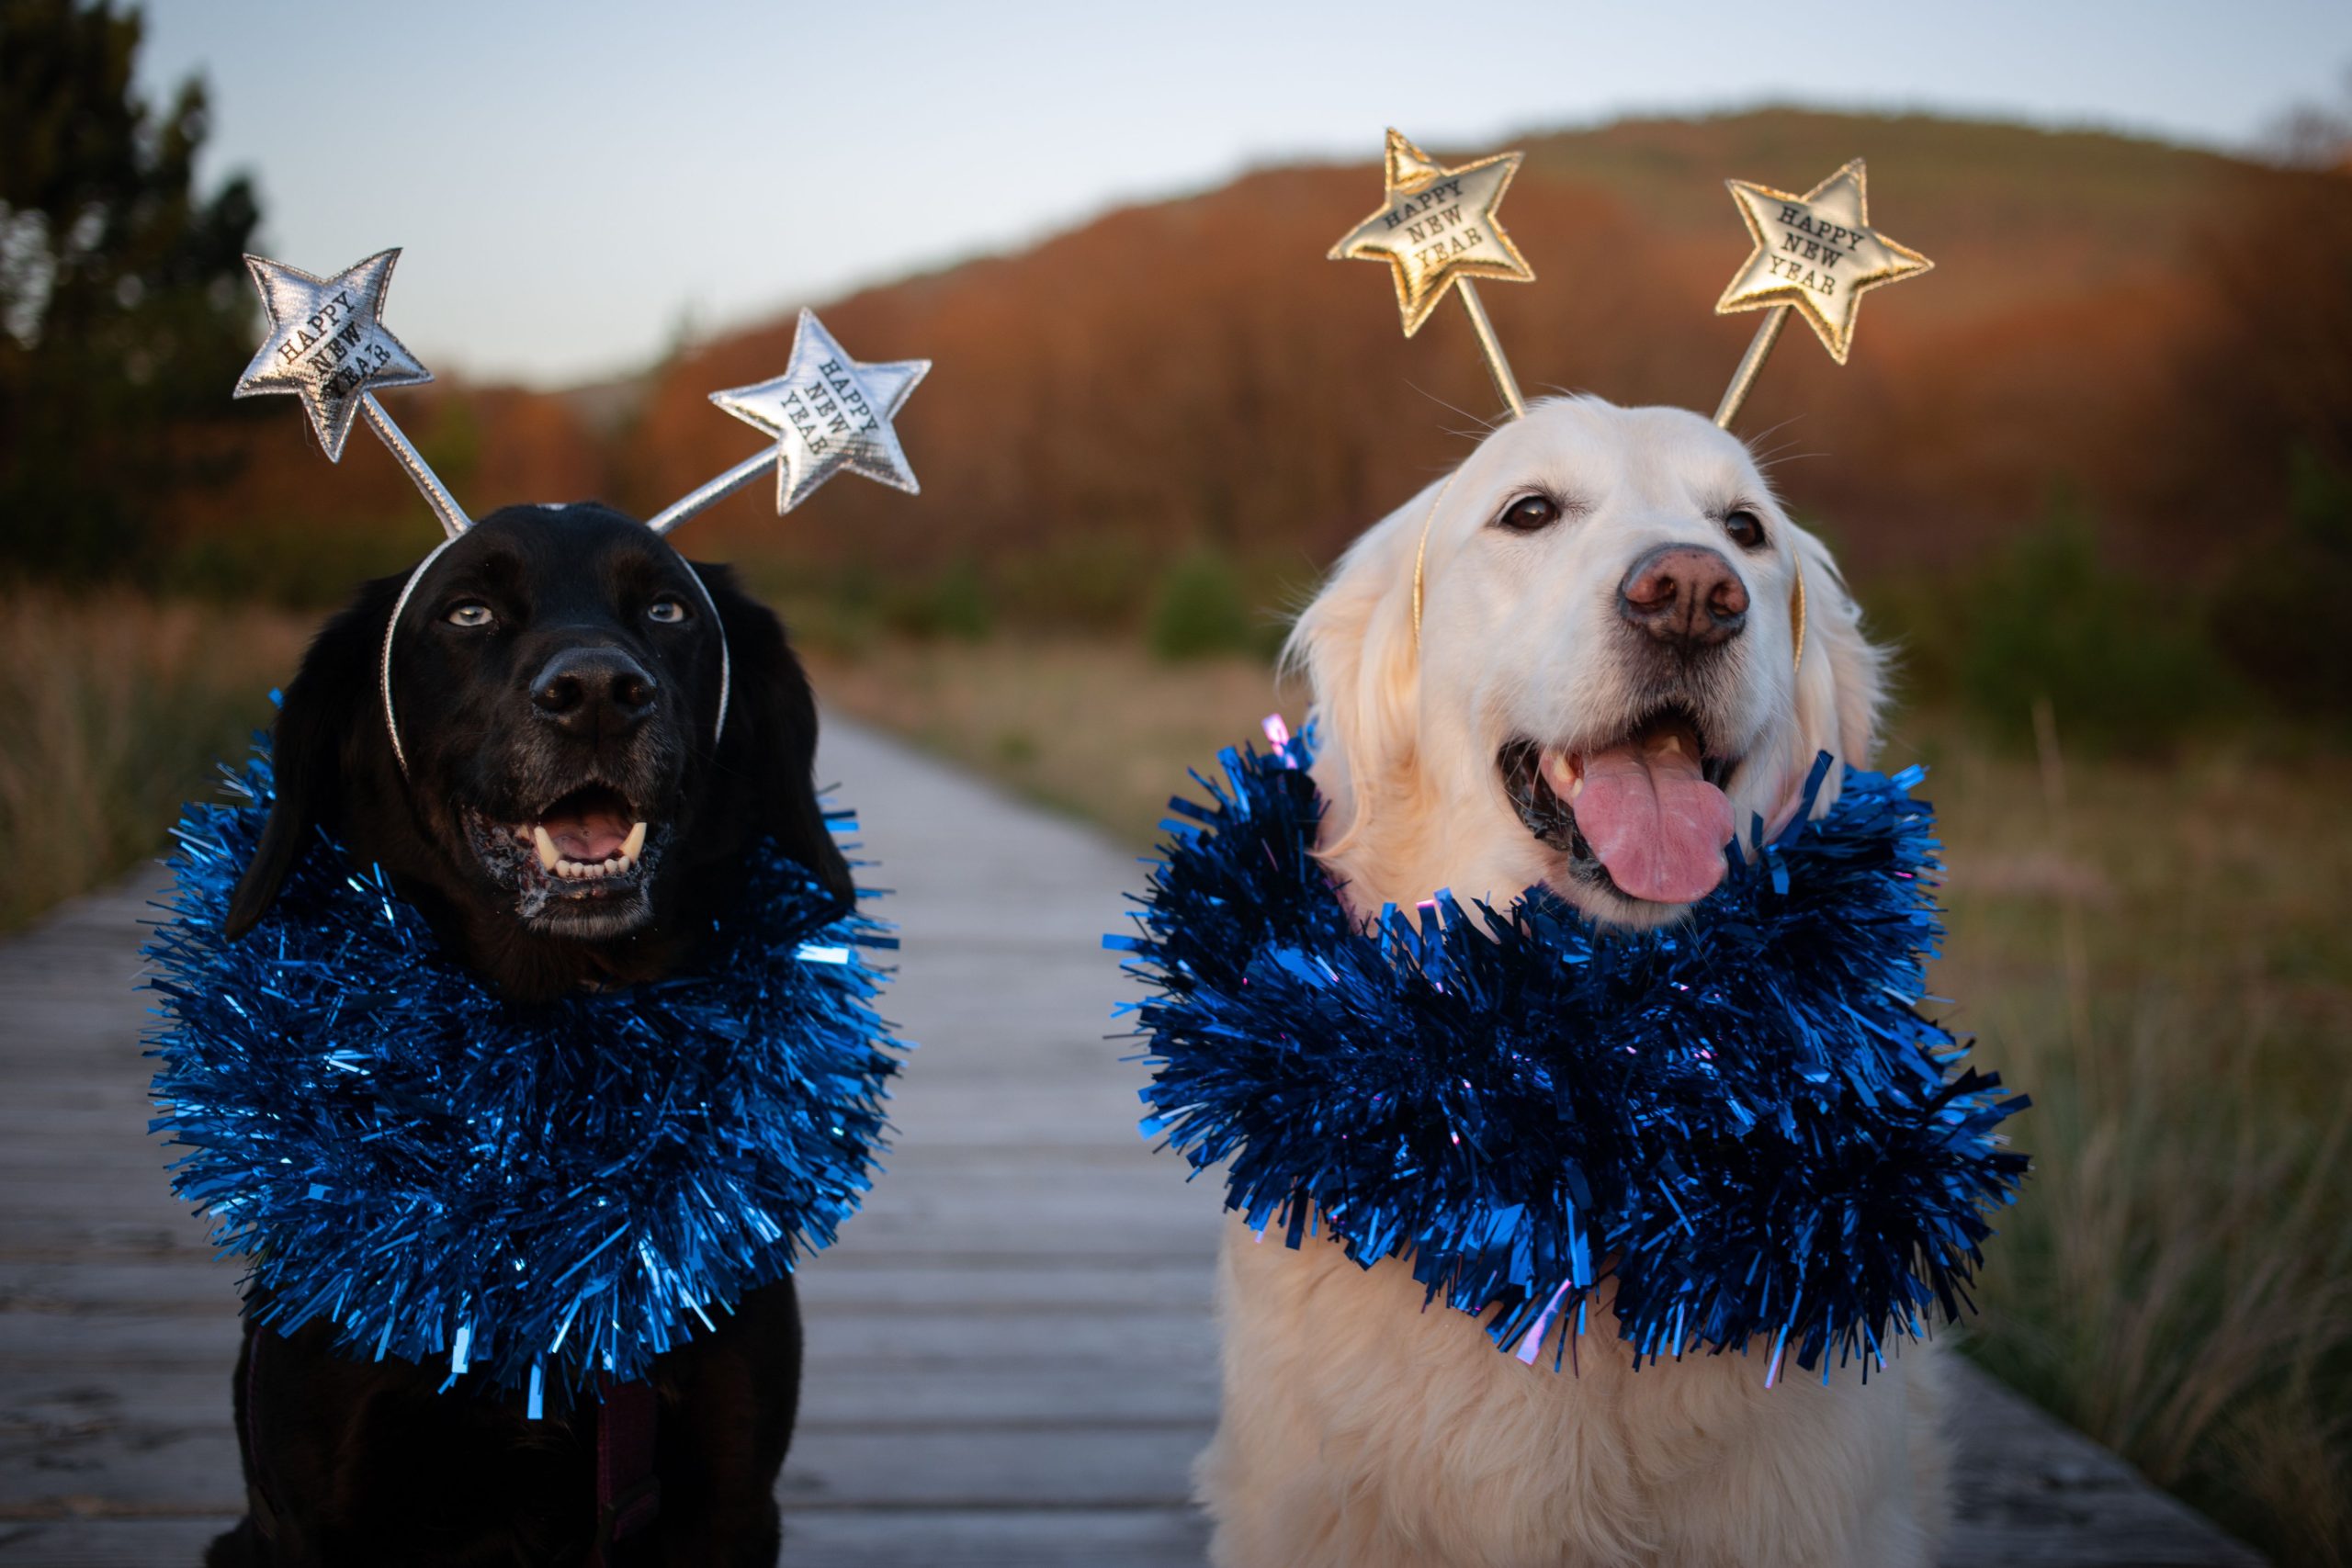 The Top 9 New Year’s Resolutions For Your Pet in 2023